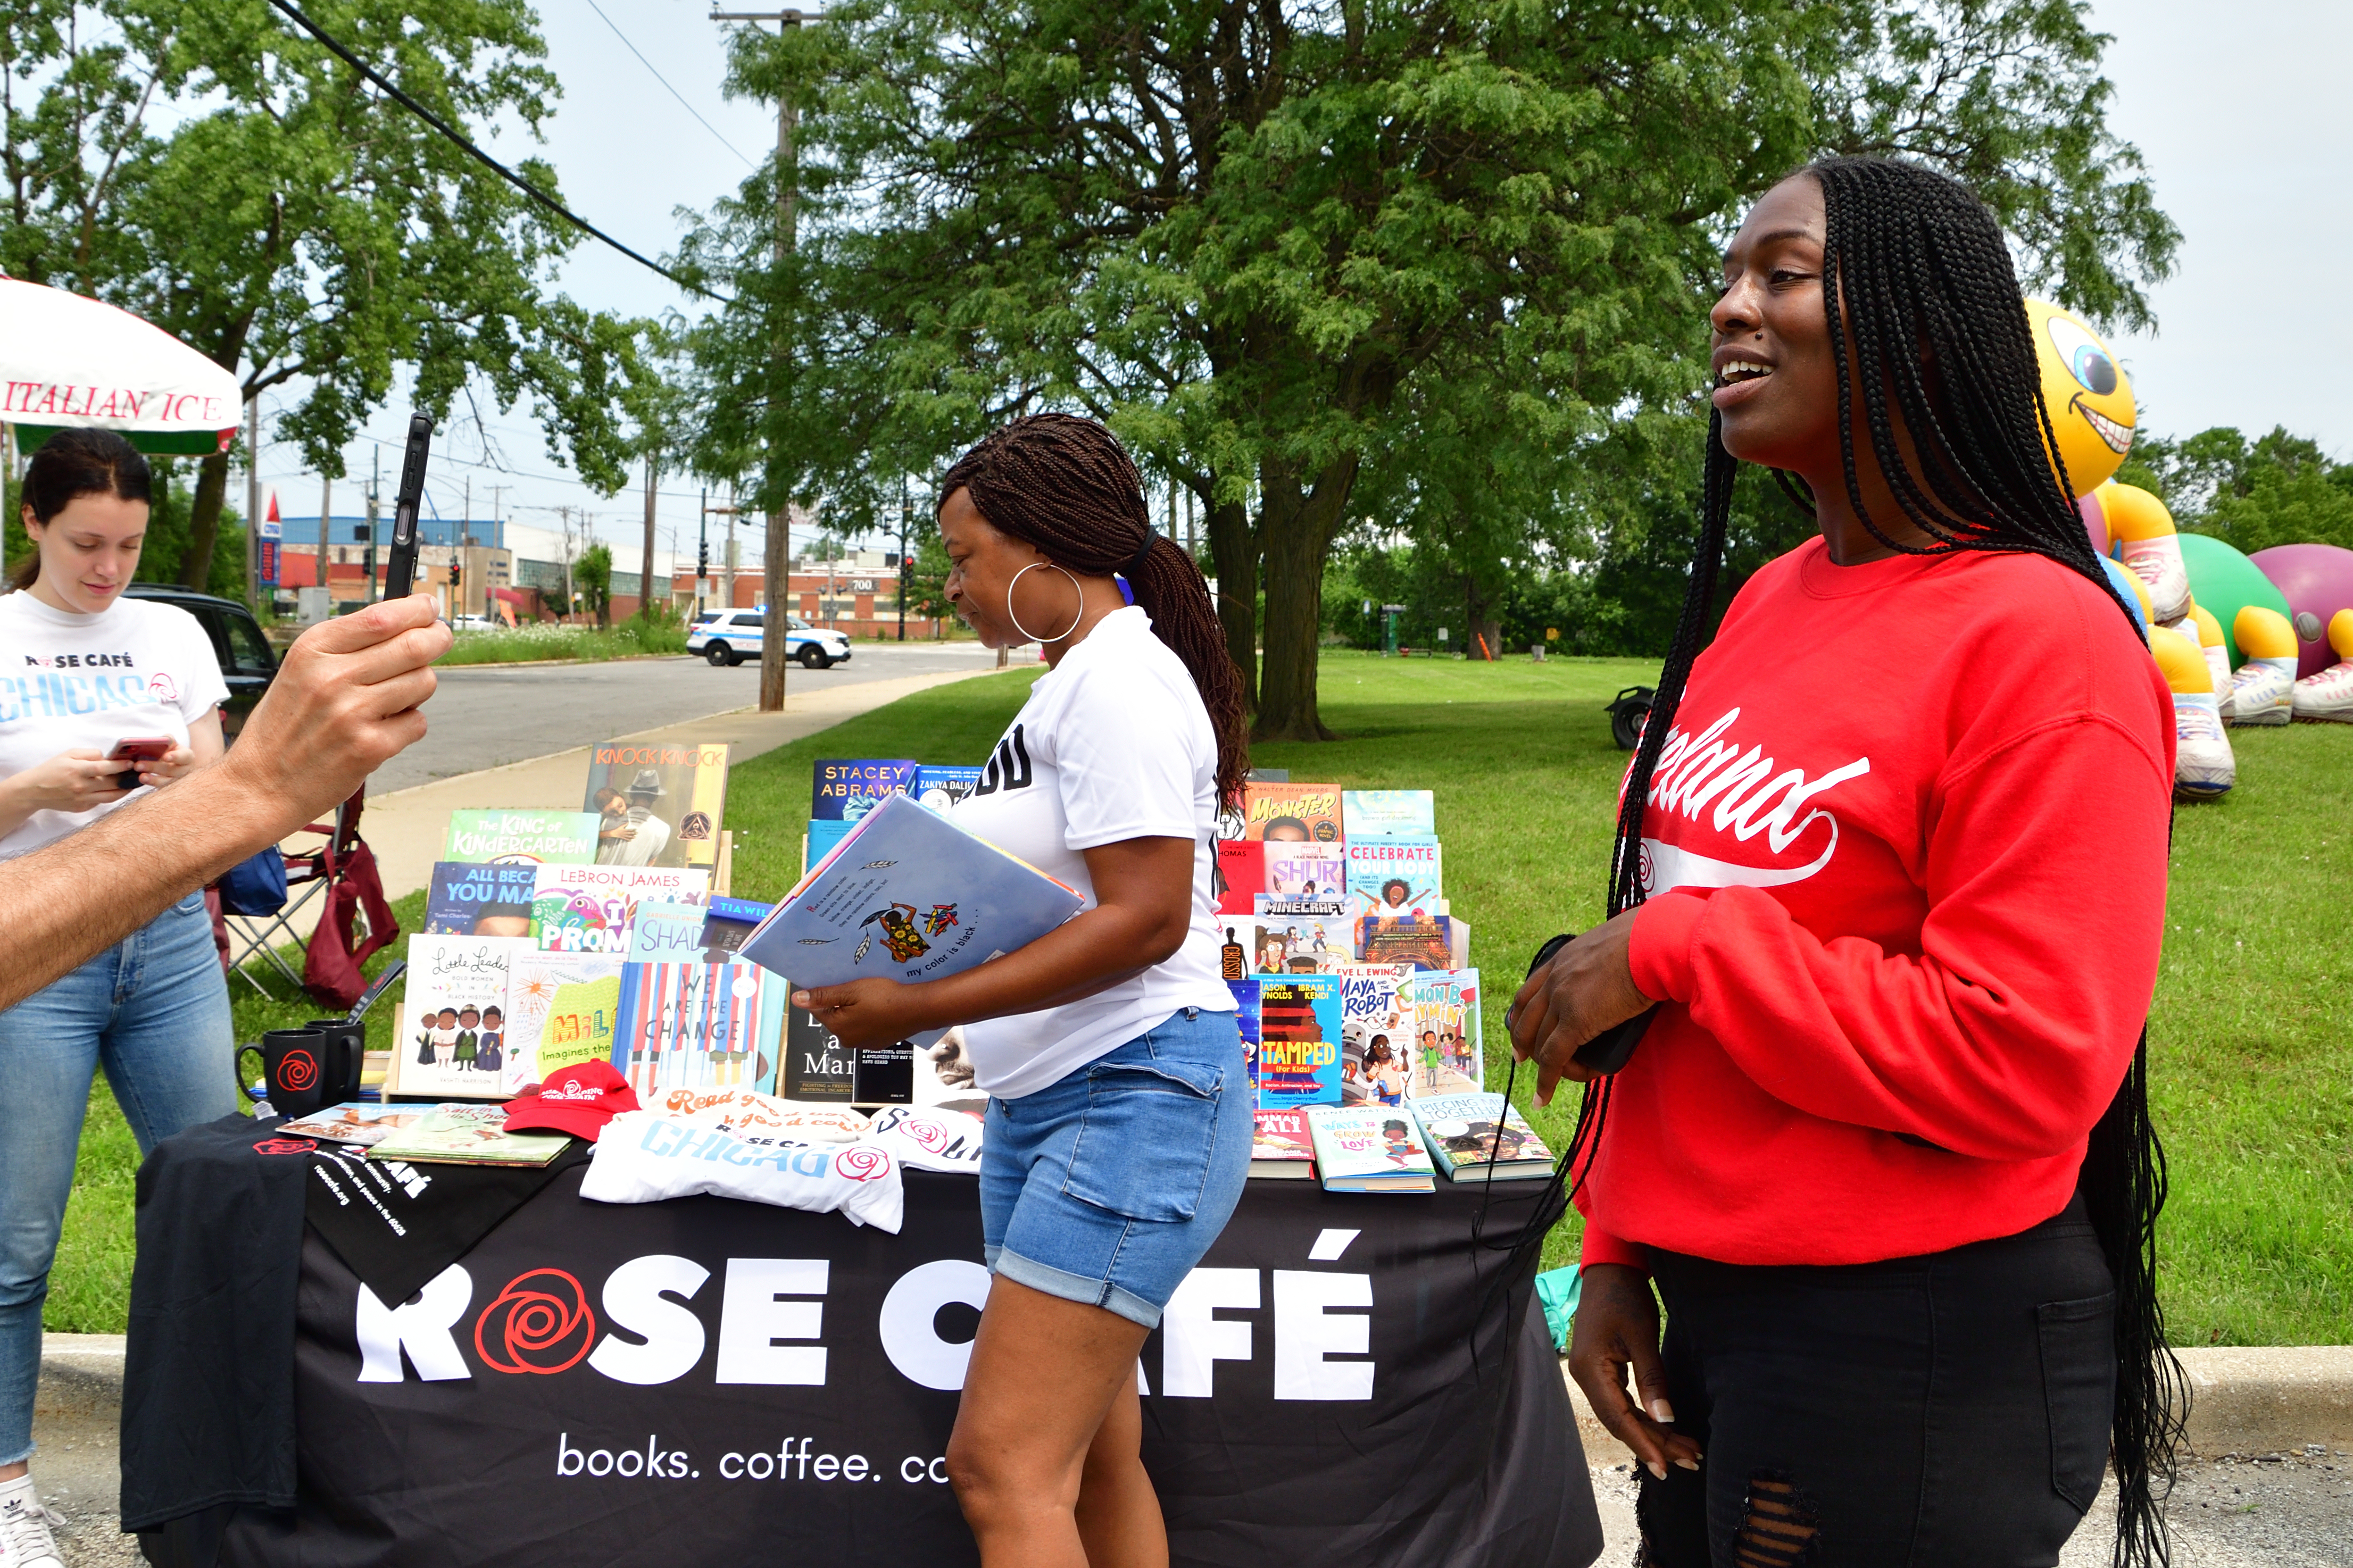 Rose Cafe Books @ Community Festival on Saturday, July 17, 2021, 5th District Chicago Police headquarters (pic by Emi Yamamoto)